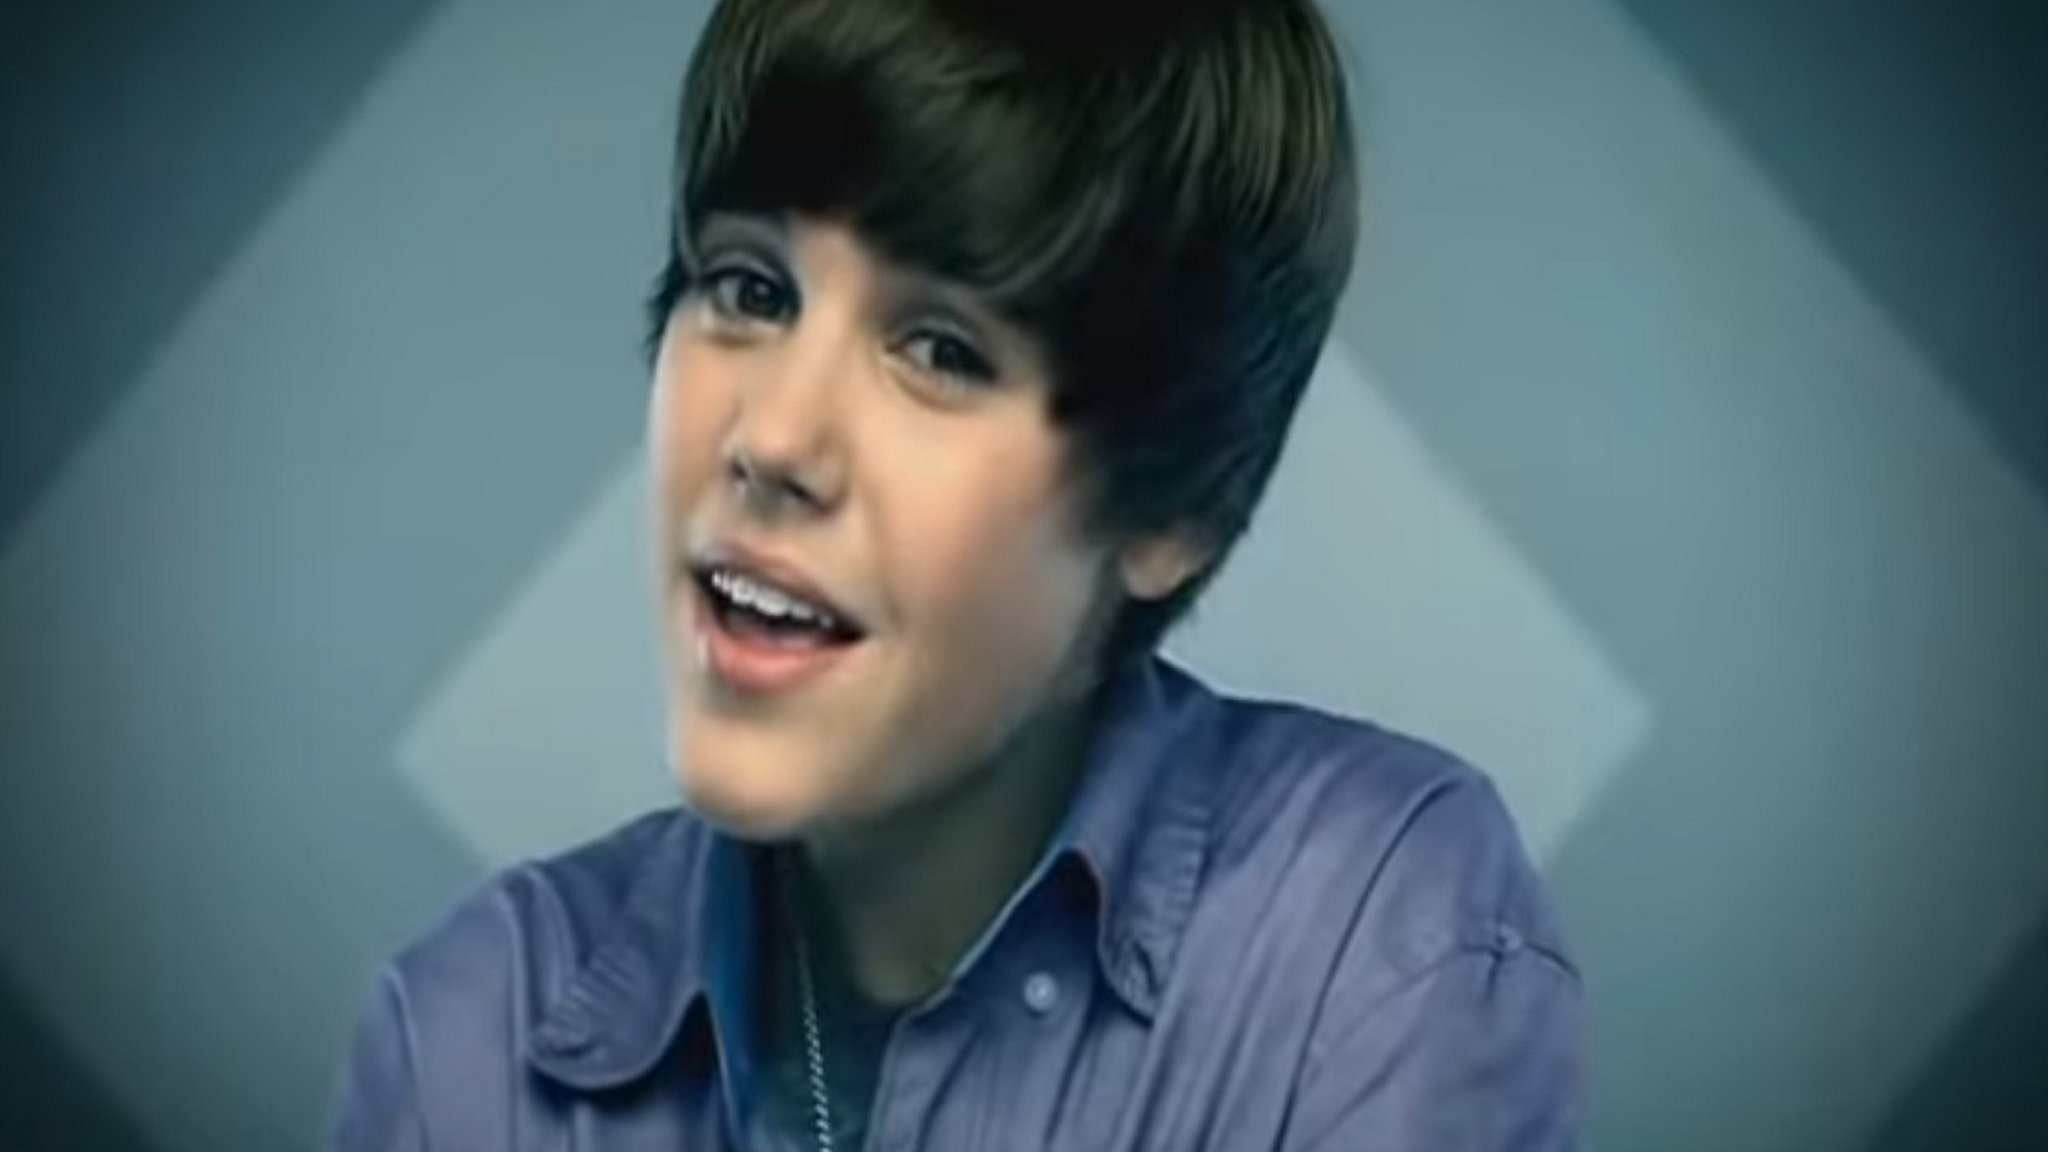 Bieber Fans Help Youtube Rewind Become Most Disliked c News